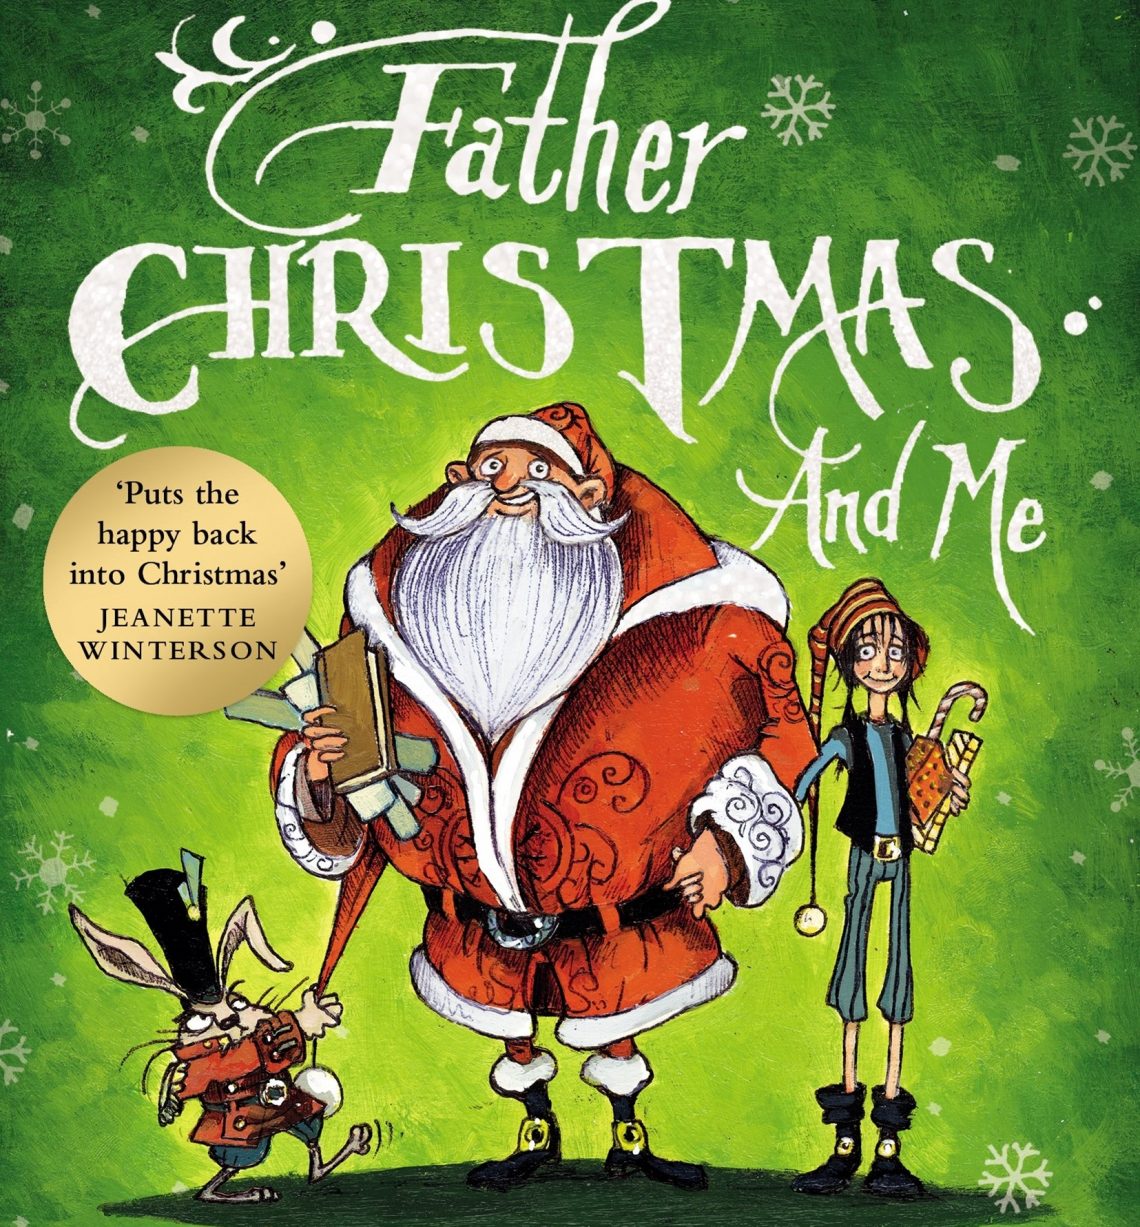 Father Christmas and Me Audiobook Free Download and Listen